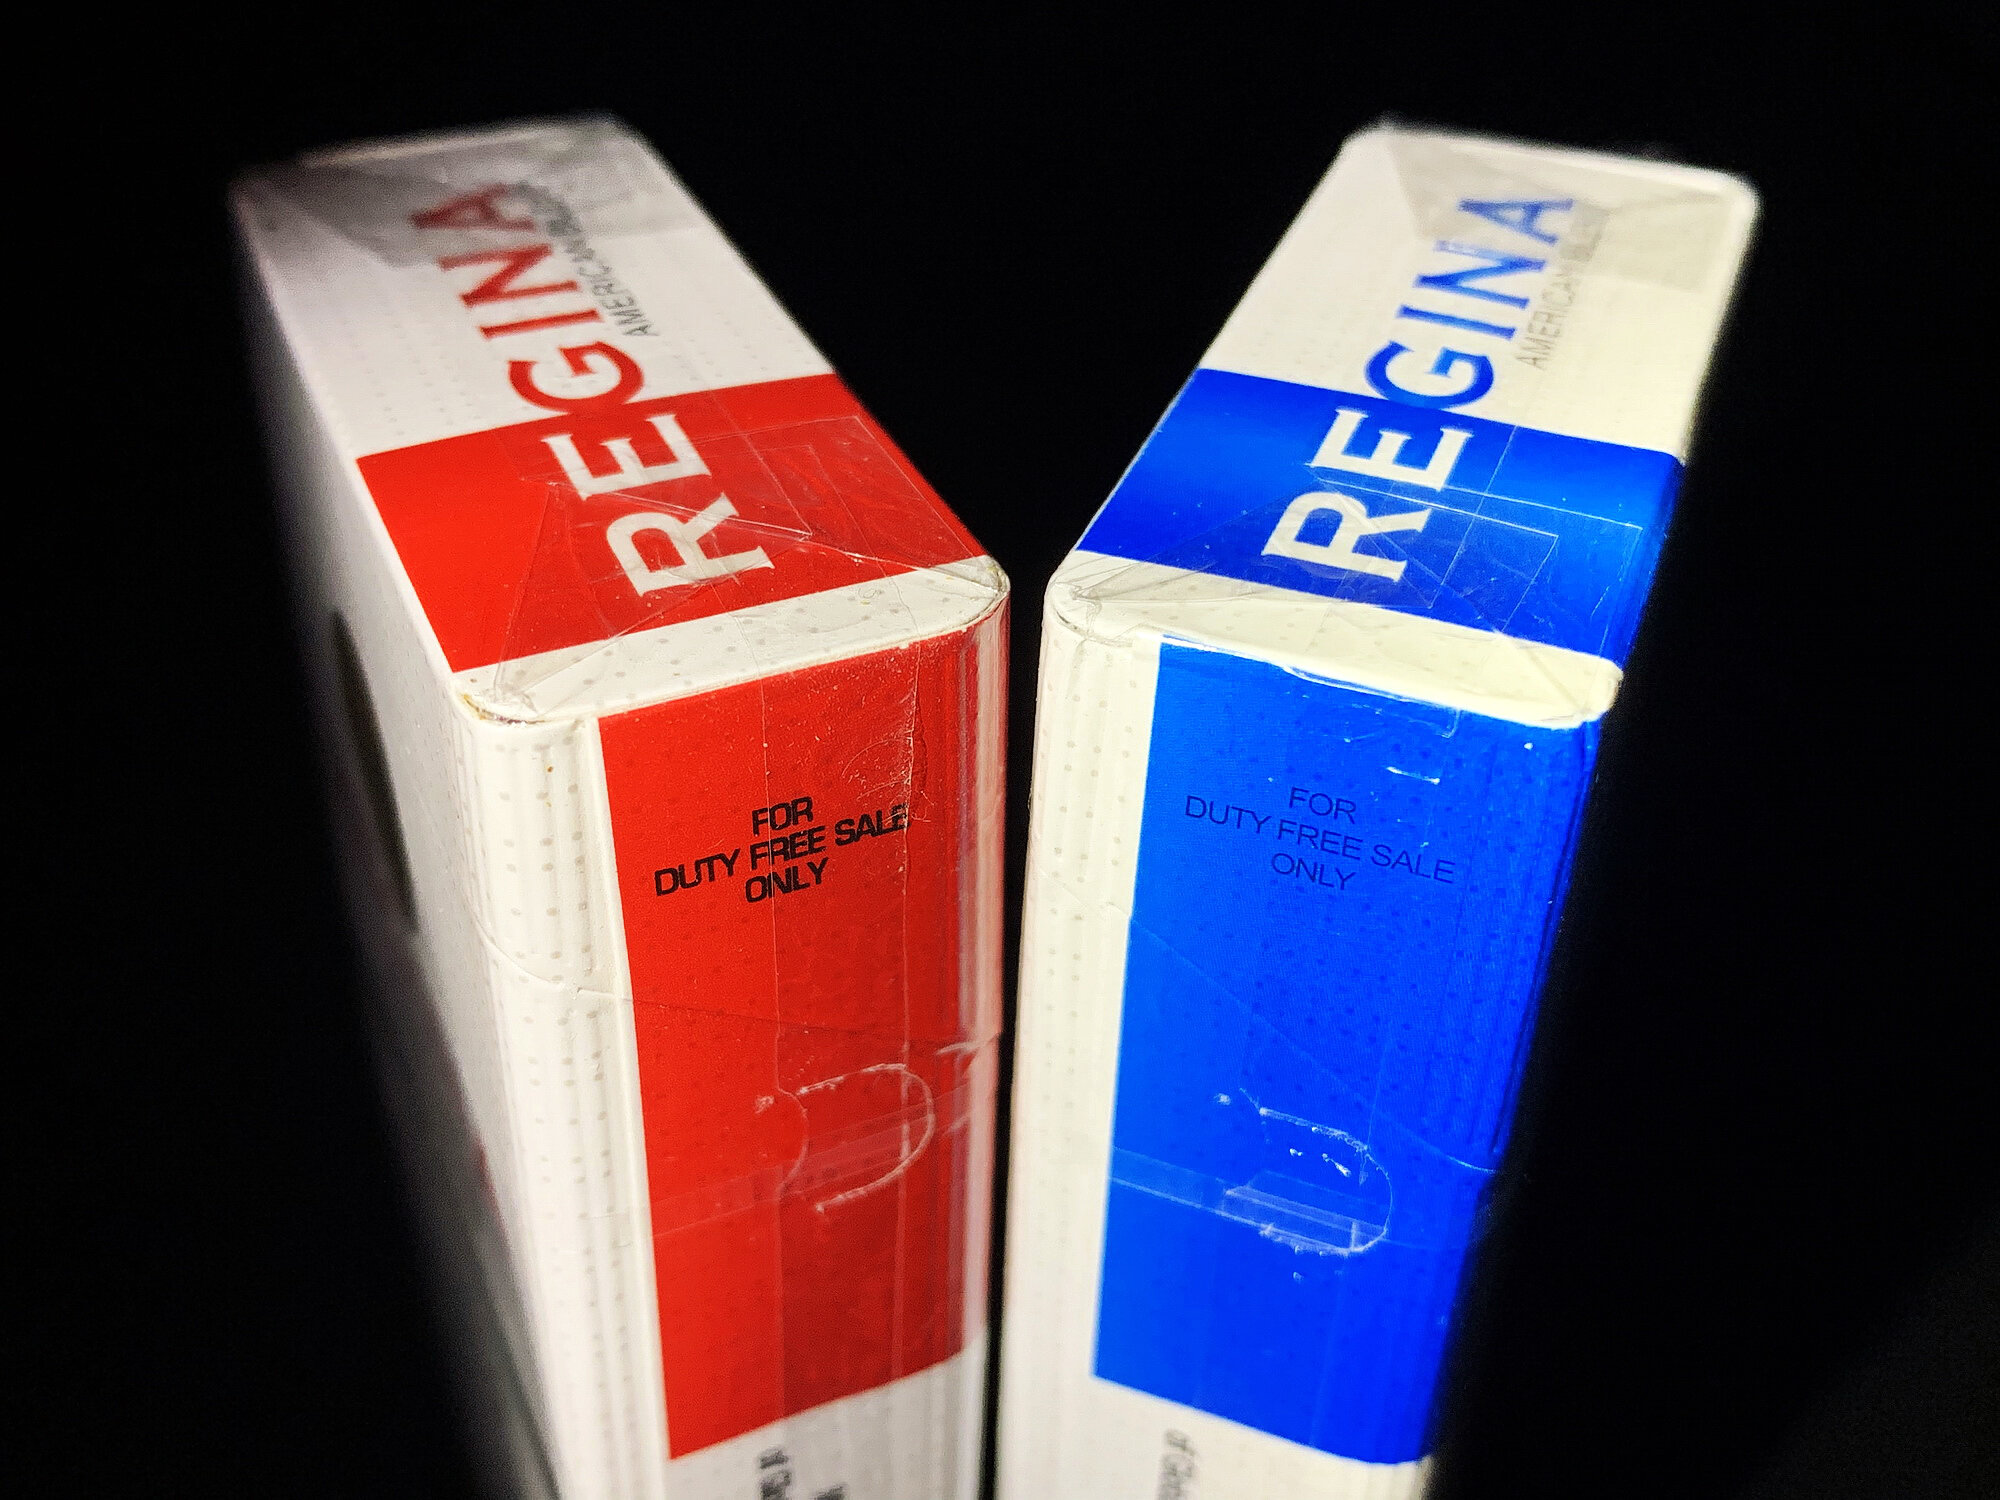 The Regina Blue and Regina Red brand cigarettes with no tax stamps on them, the warning labels in English instead of Ukrainian, and marked “For Duty Free Sale Only&#8221; in small letters on the side of the pack are sold illegally in Ukraine.